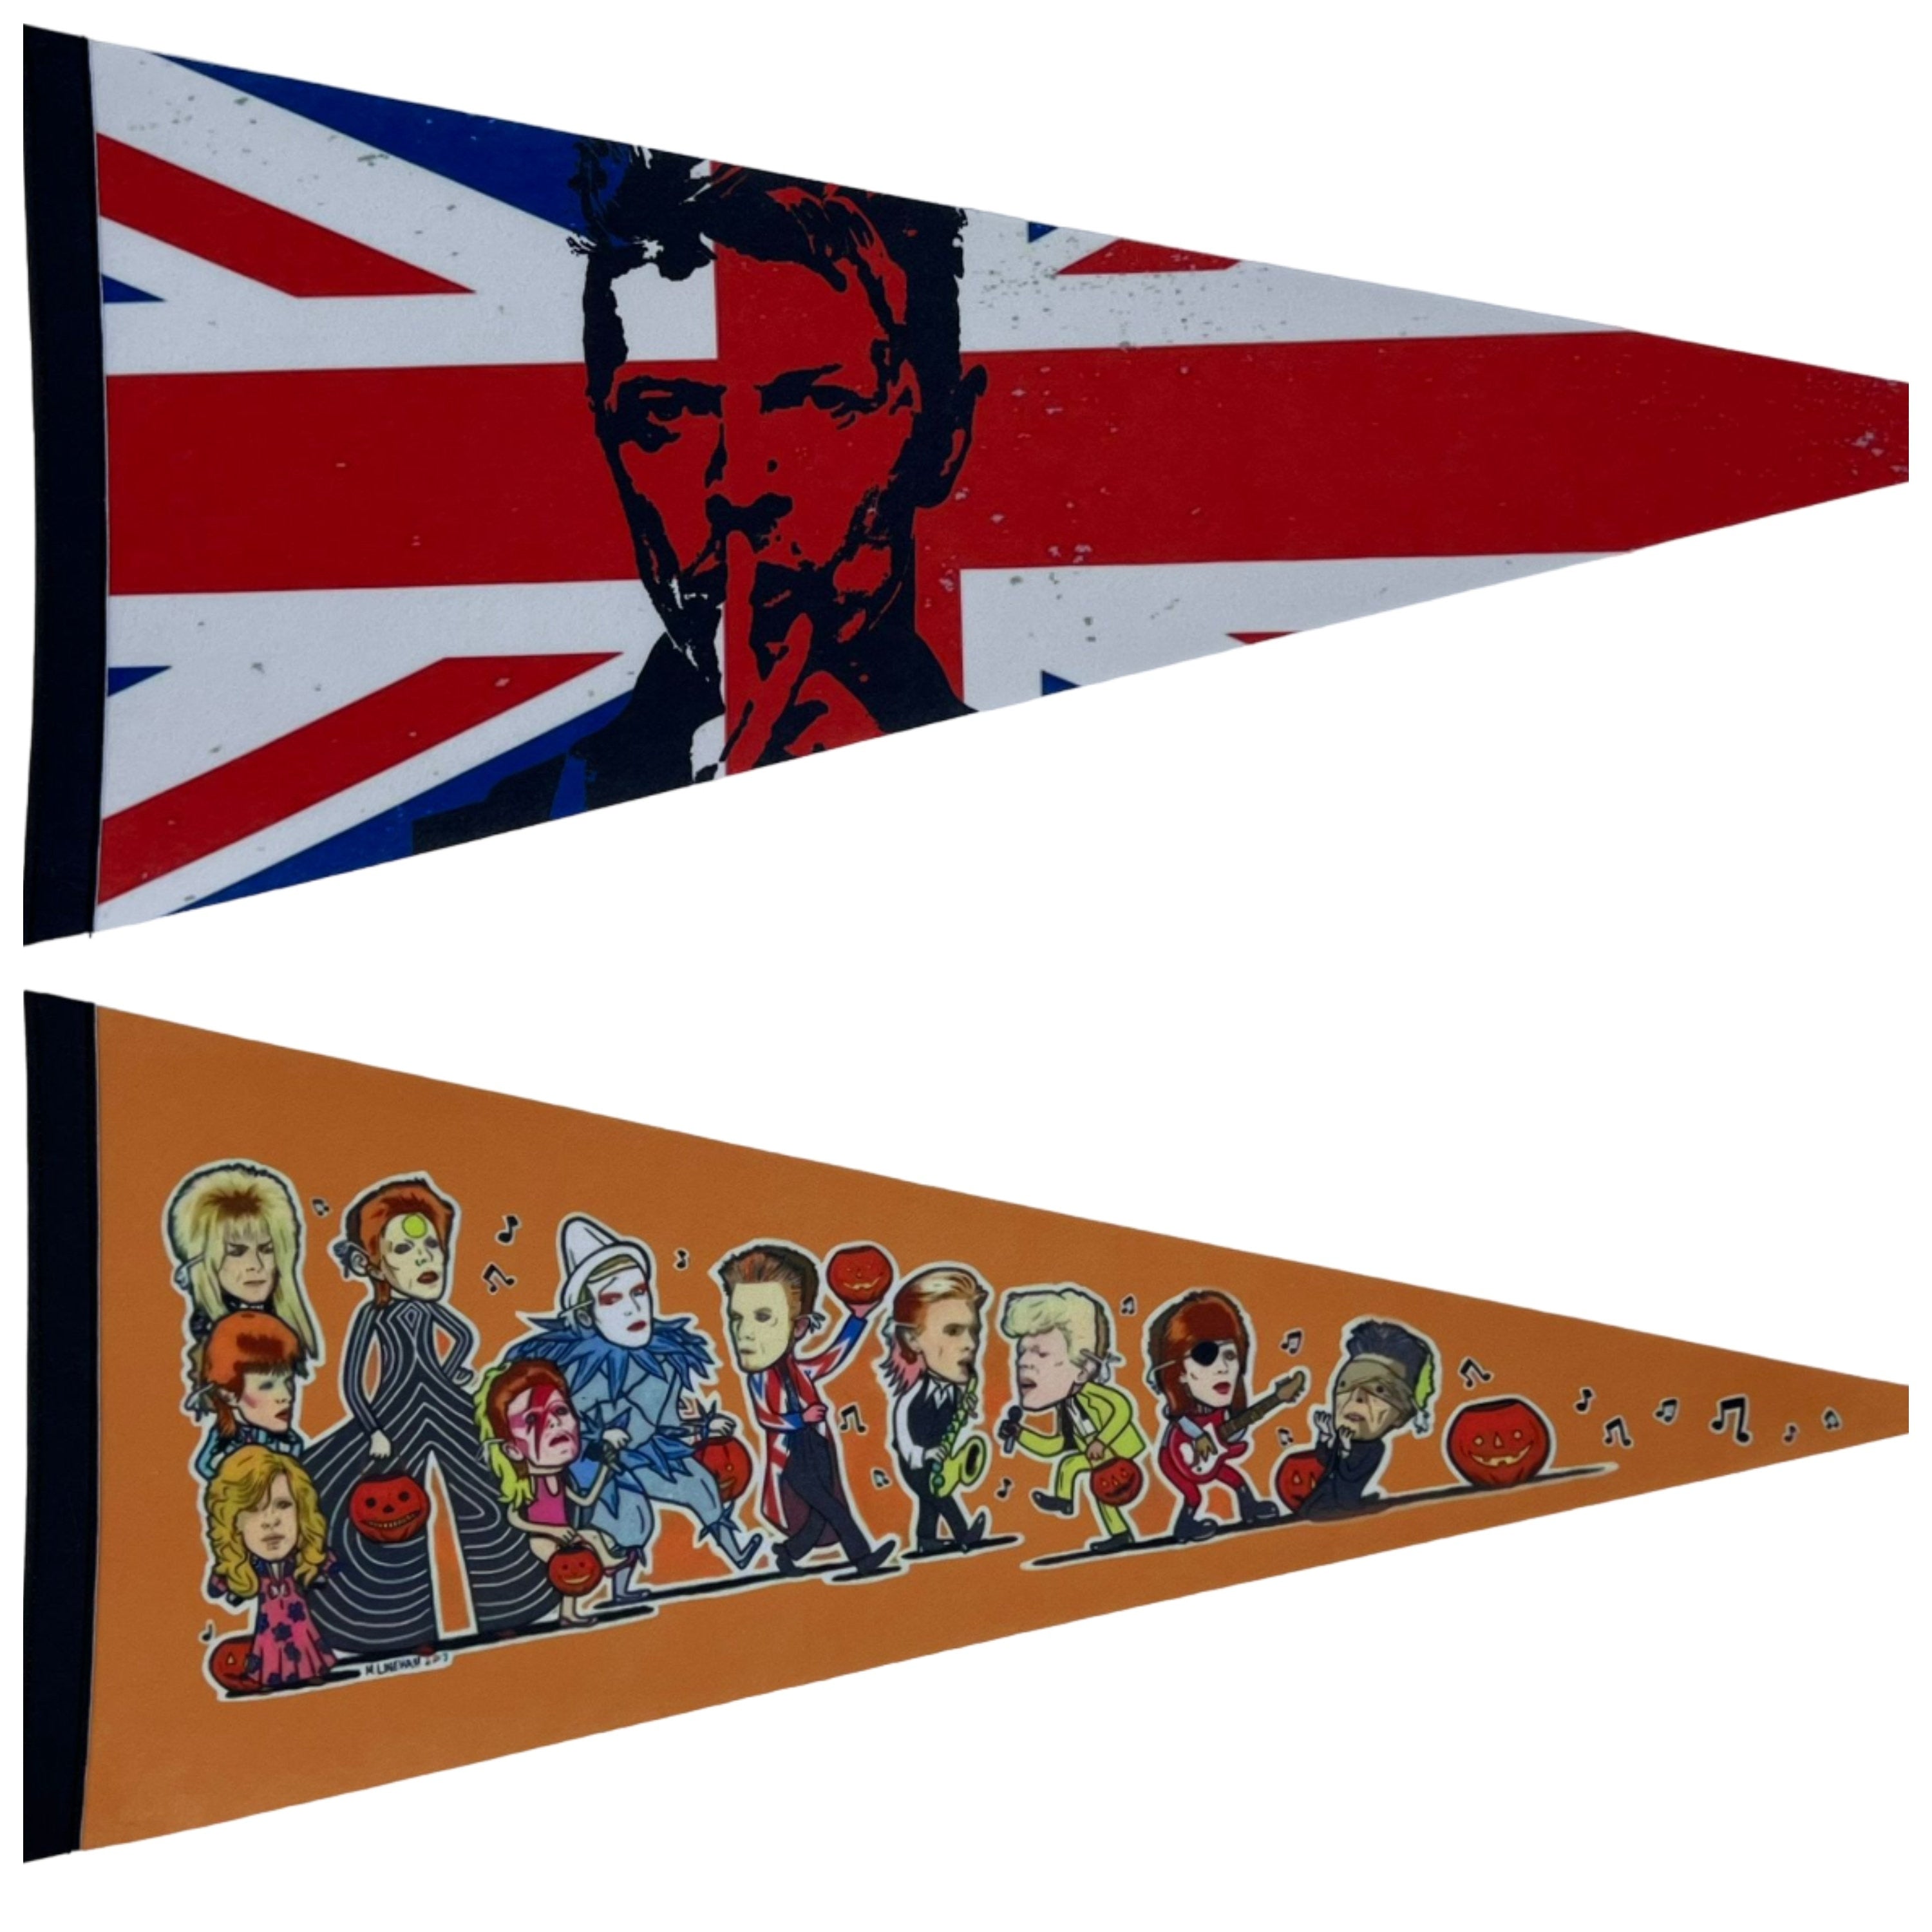 David Bowie Music collectibles vintage pennants David Bowie vaantje vlaggetje vlag pennant flag rock uk bowie wall decor david bowie gift uk - Characters